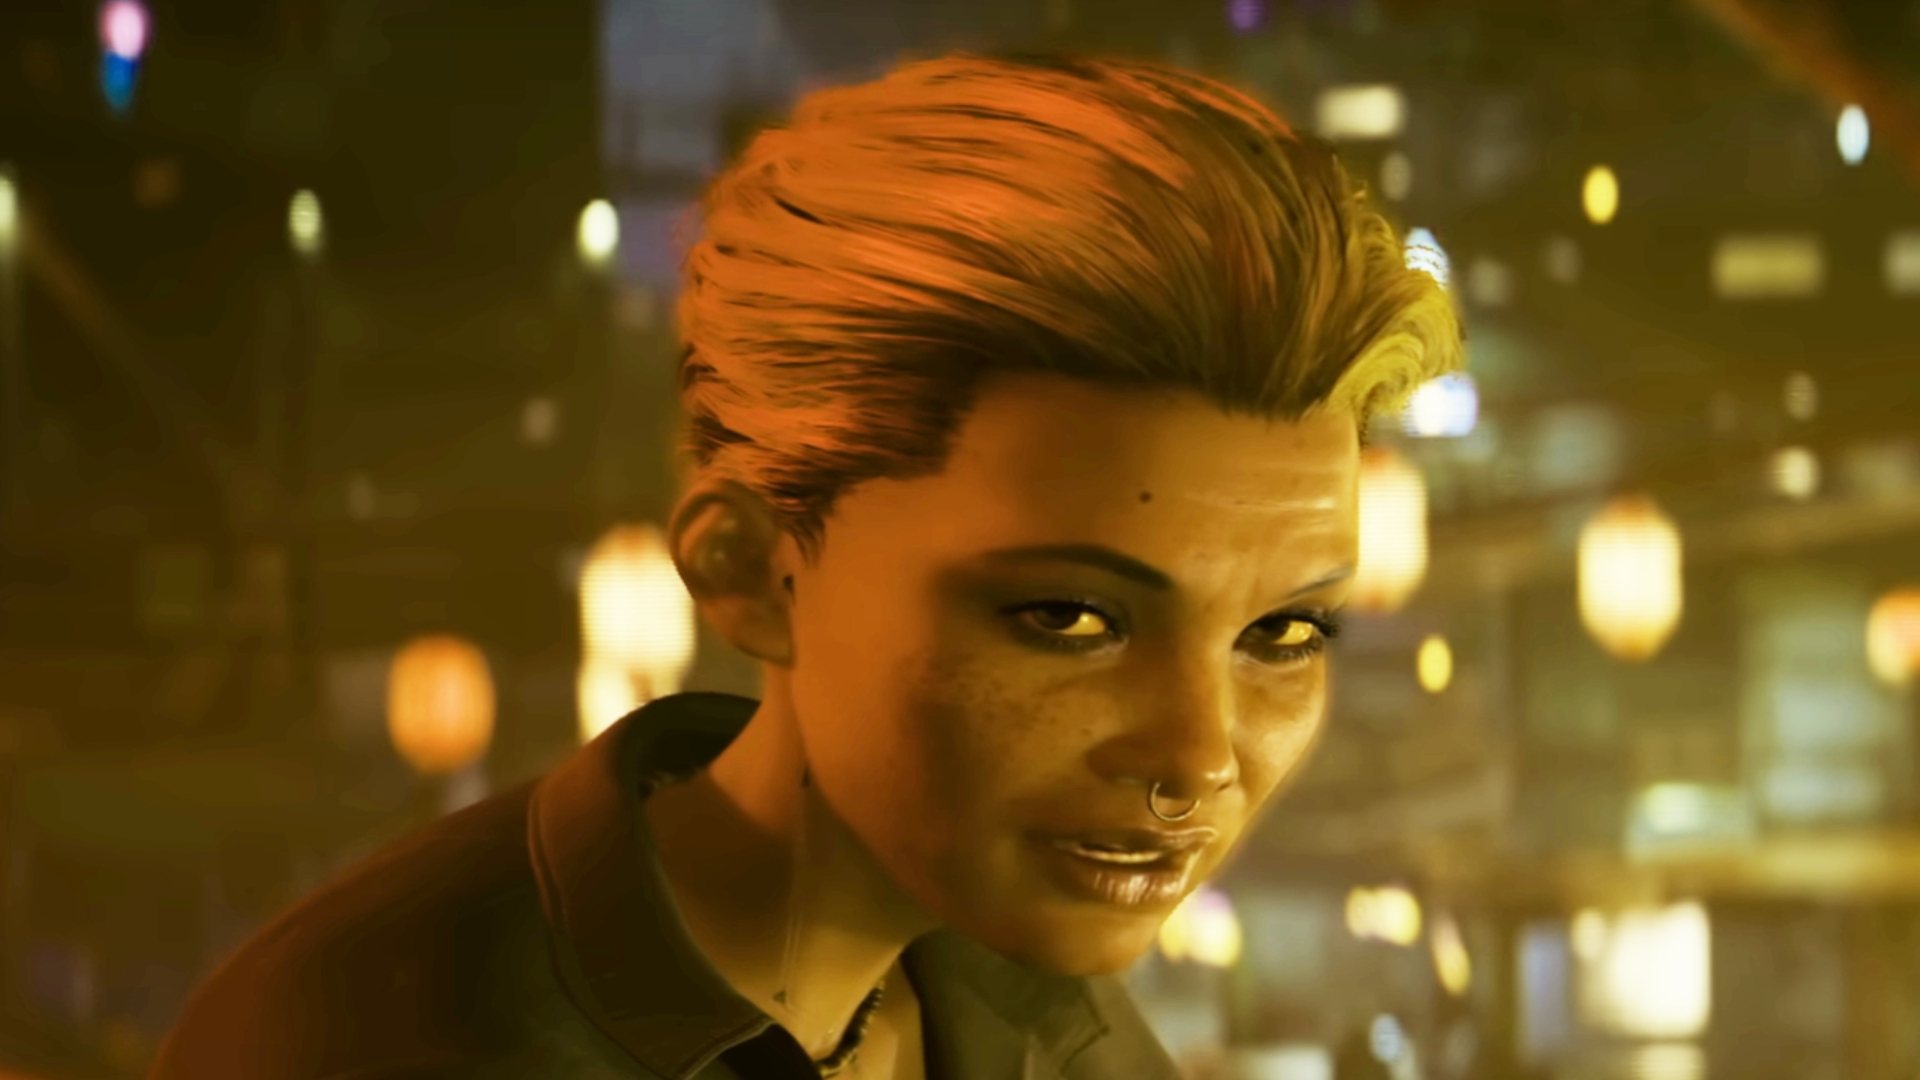 AMD Ryzen CPUs experience up to 40% increased FPS with community fix for Cyberpunk 2077